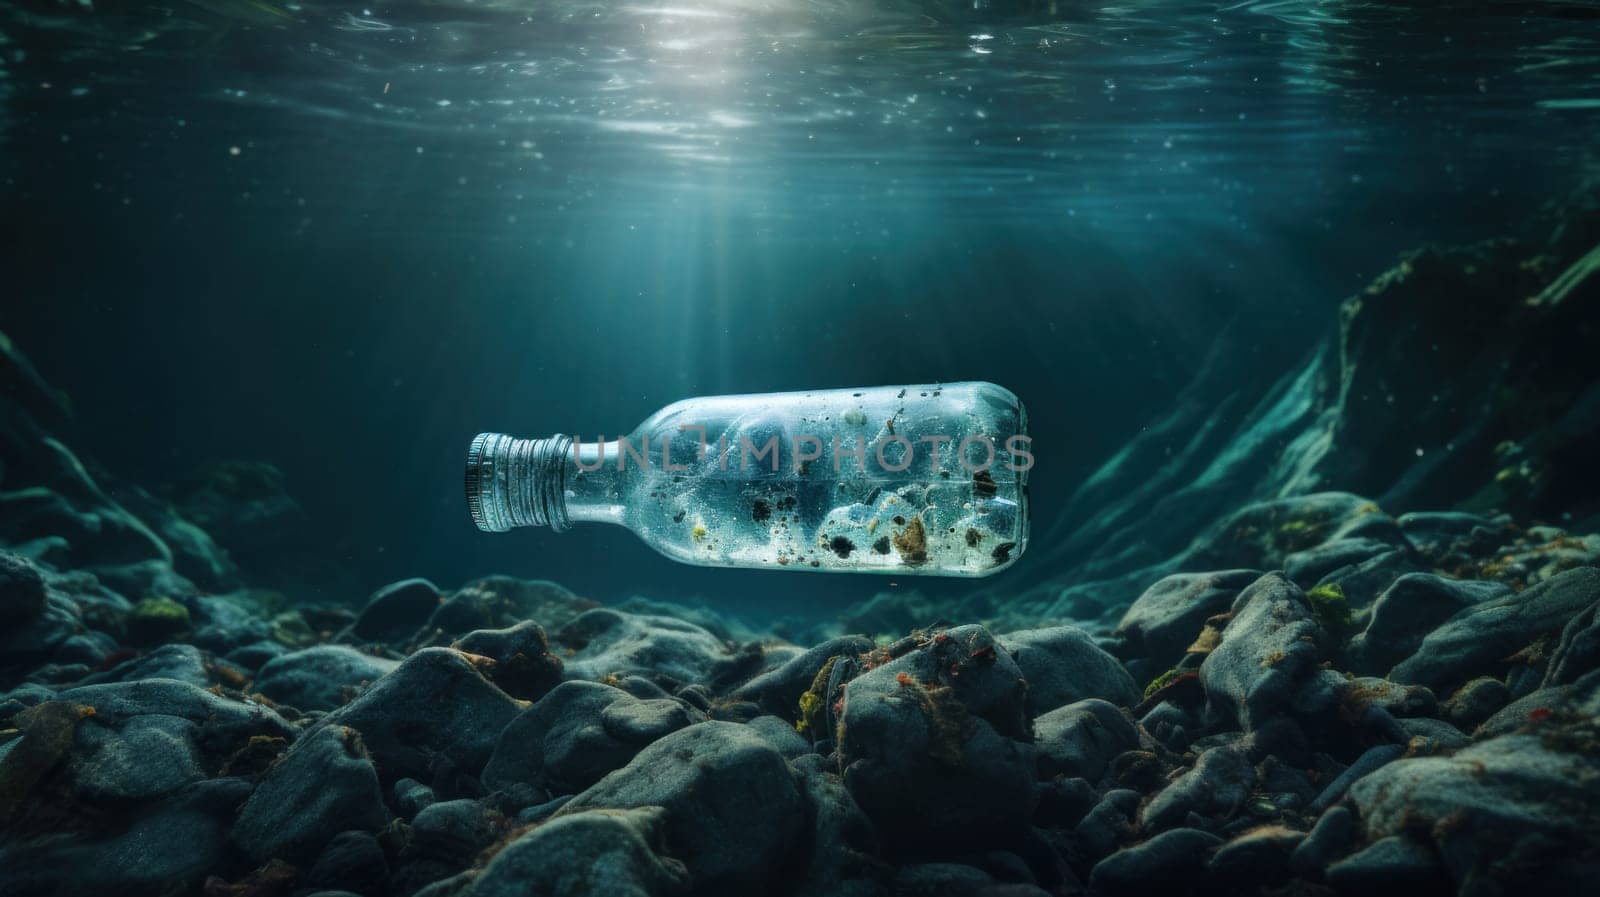 A bottle floating in the water with sunlight shining through